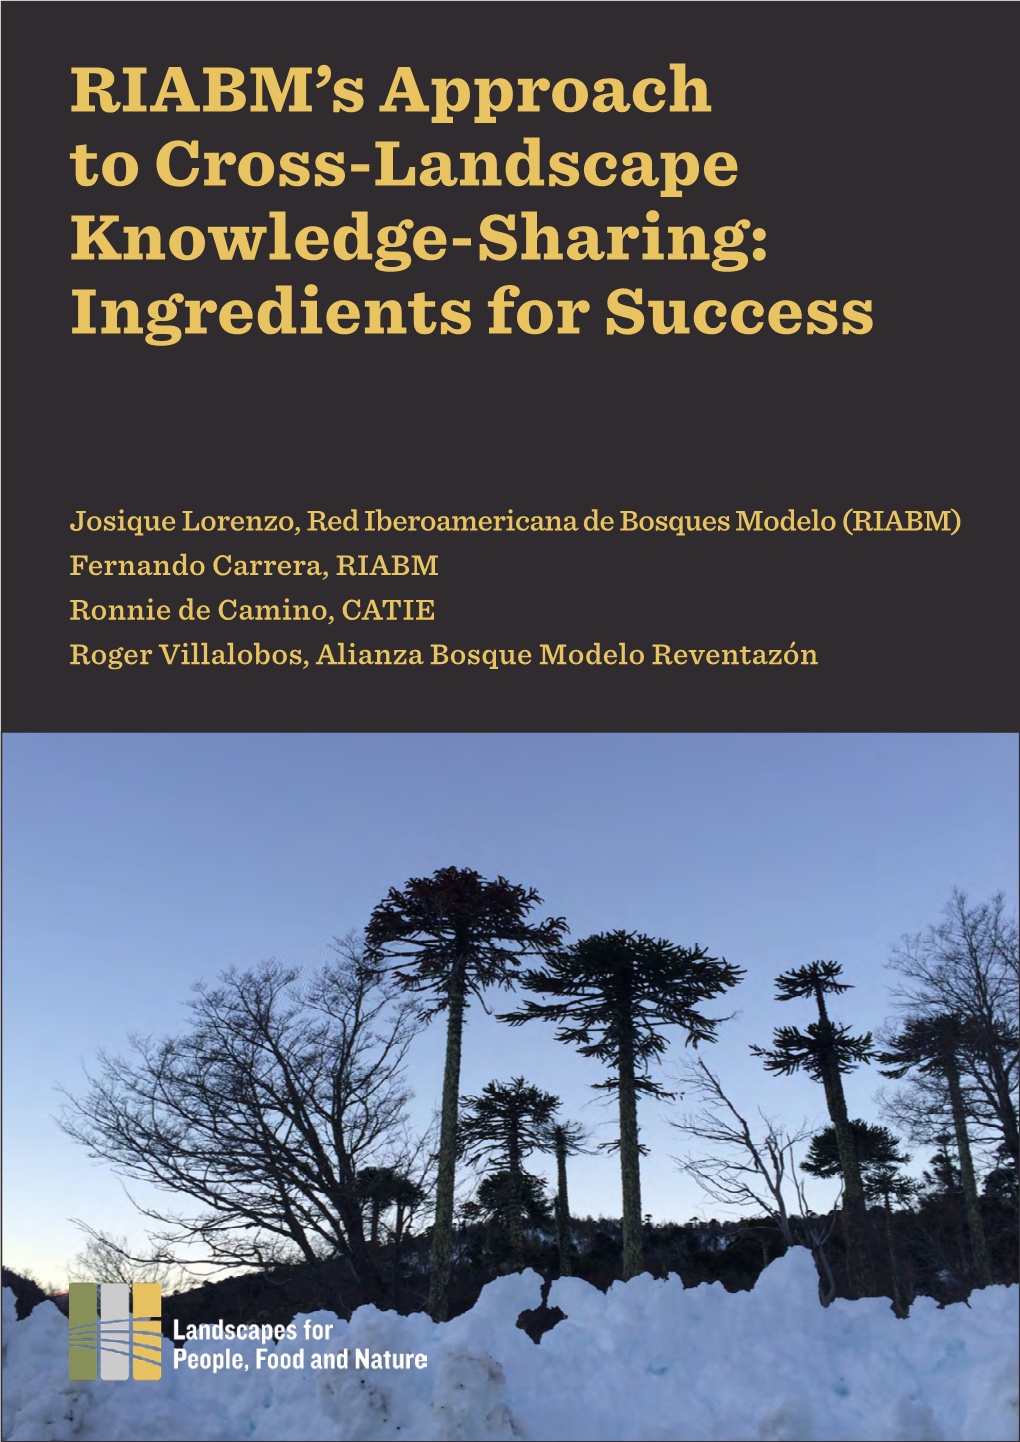 RIABM's Approach to Cross-Landscape Knowledge